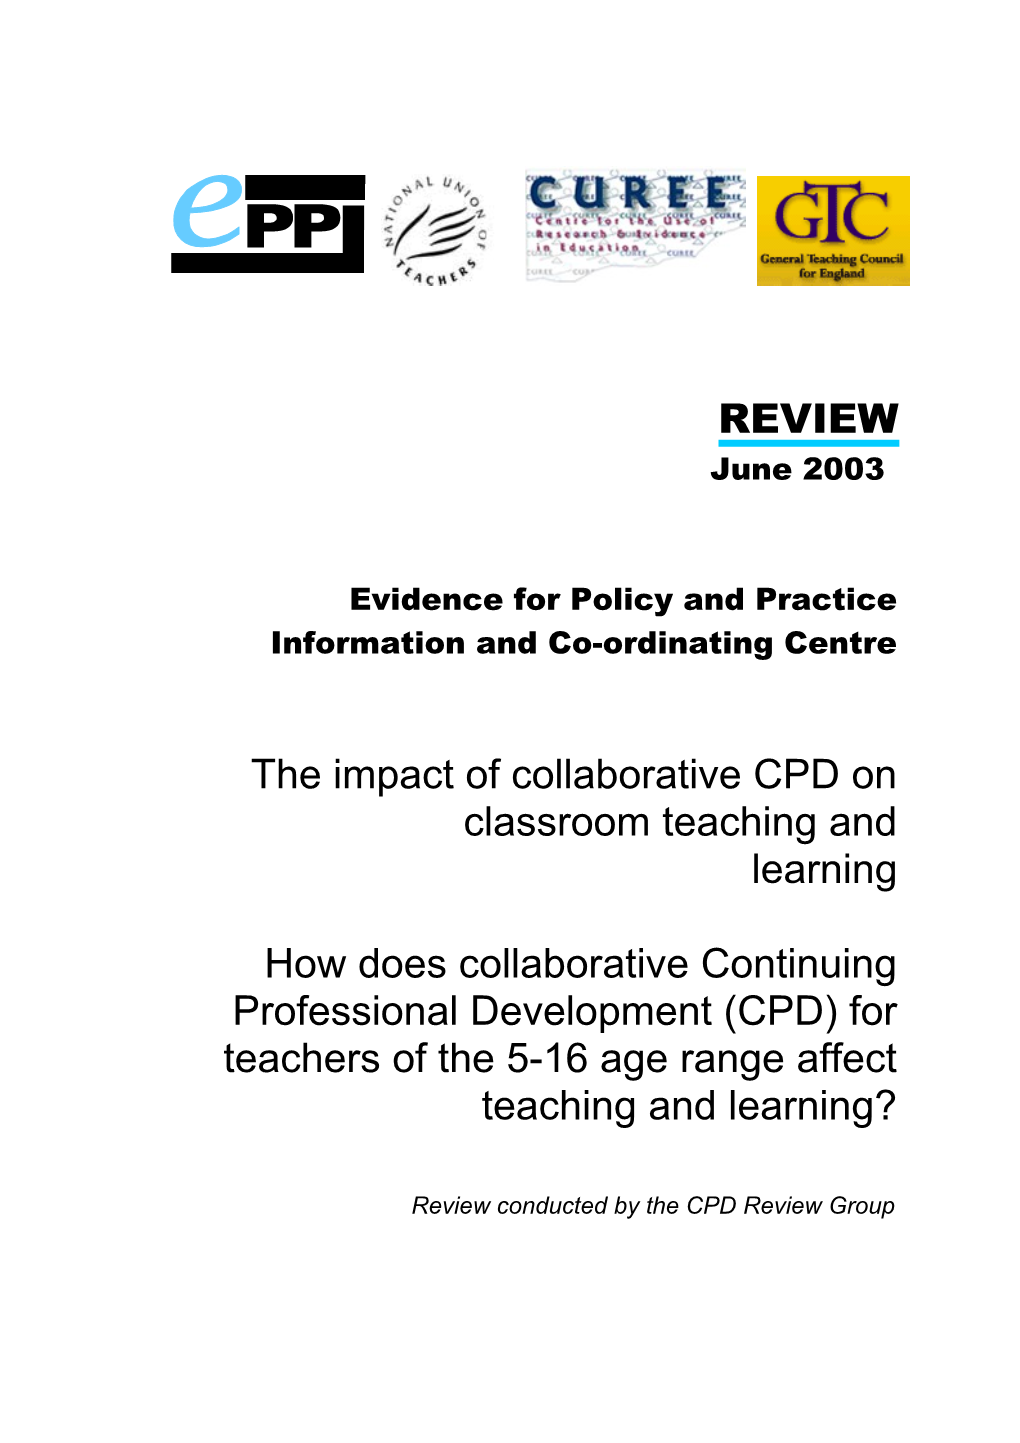 Evidence for Policy and Practice Information and Co-Ordinating Centre